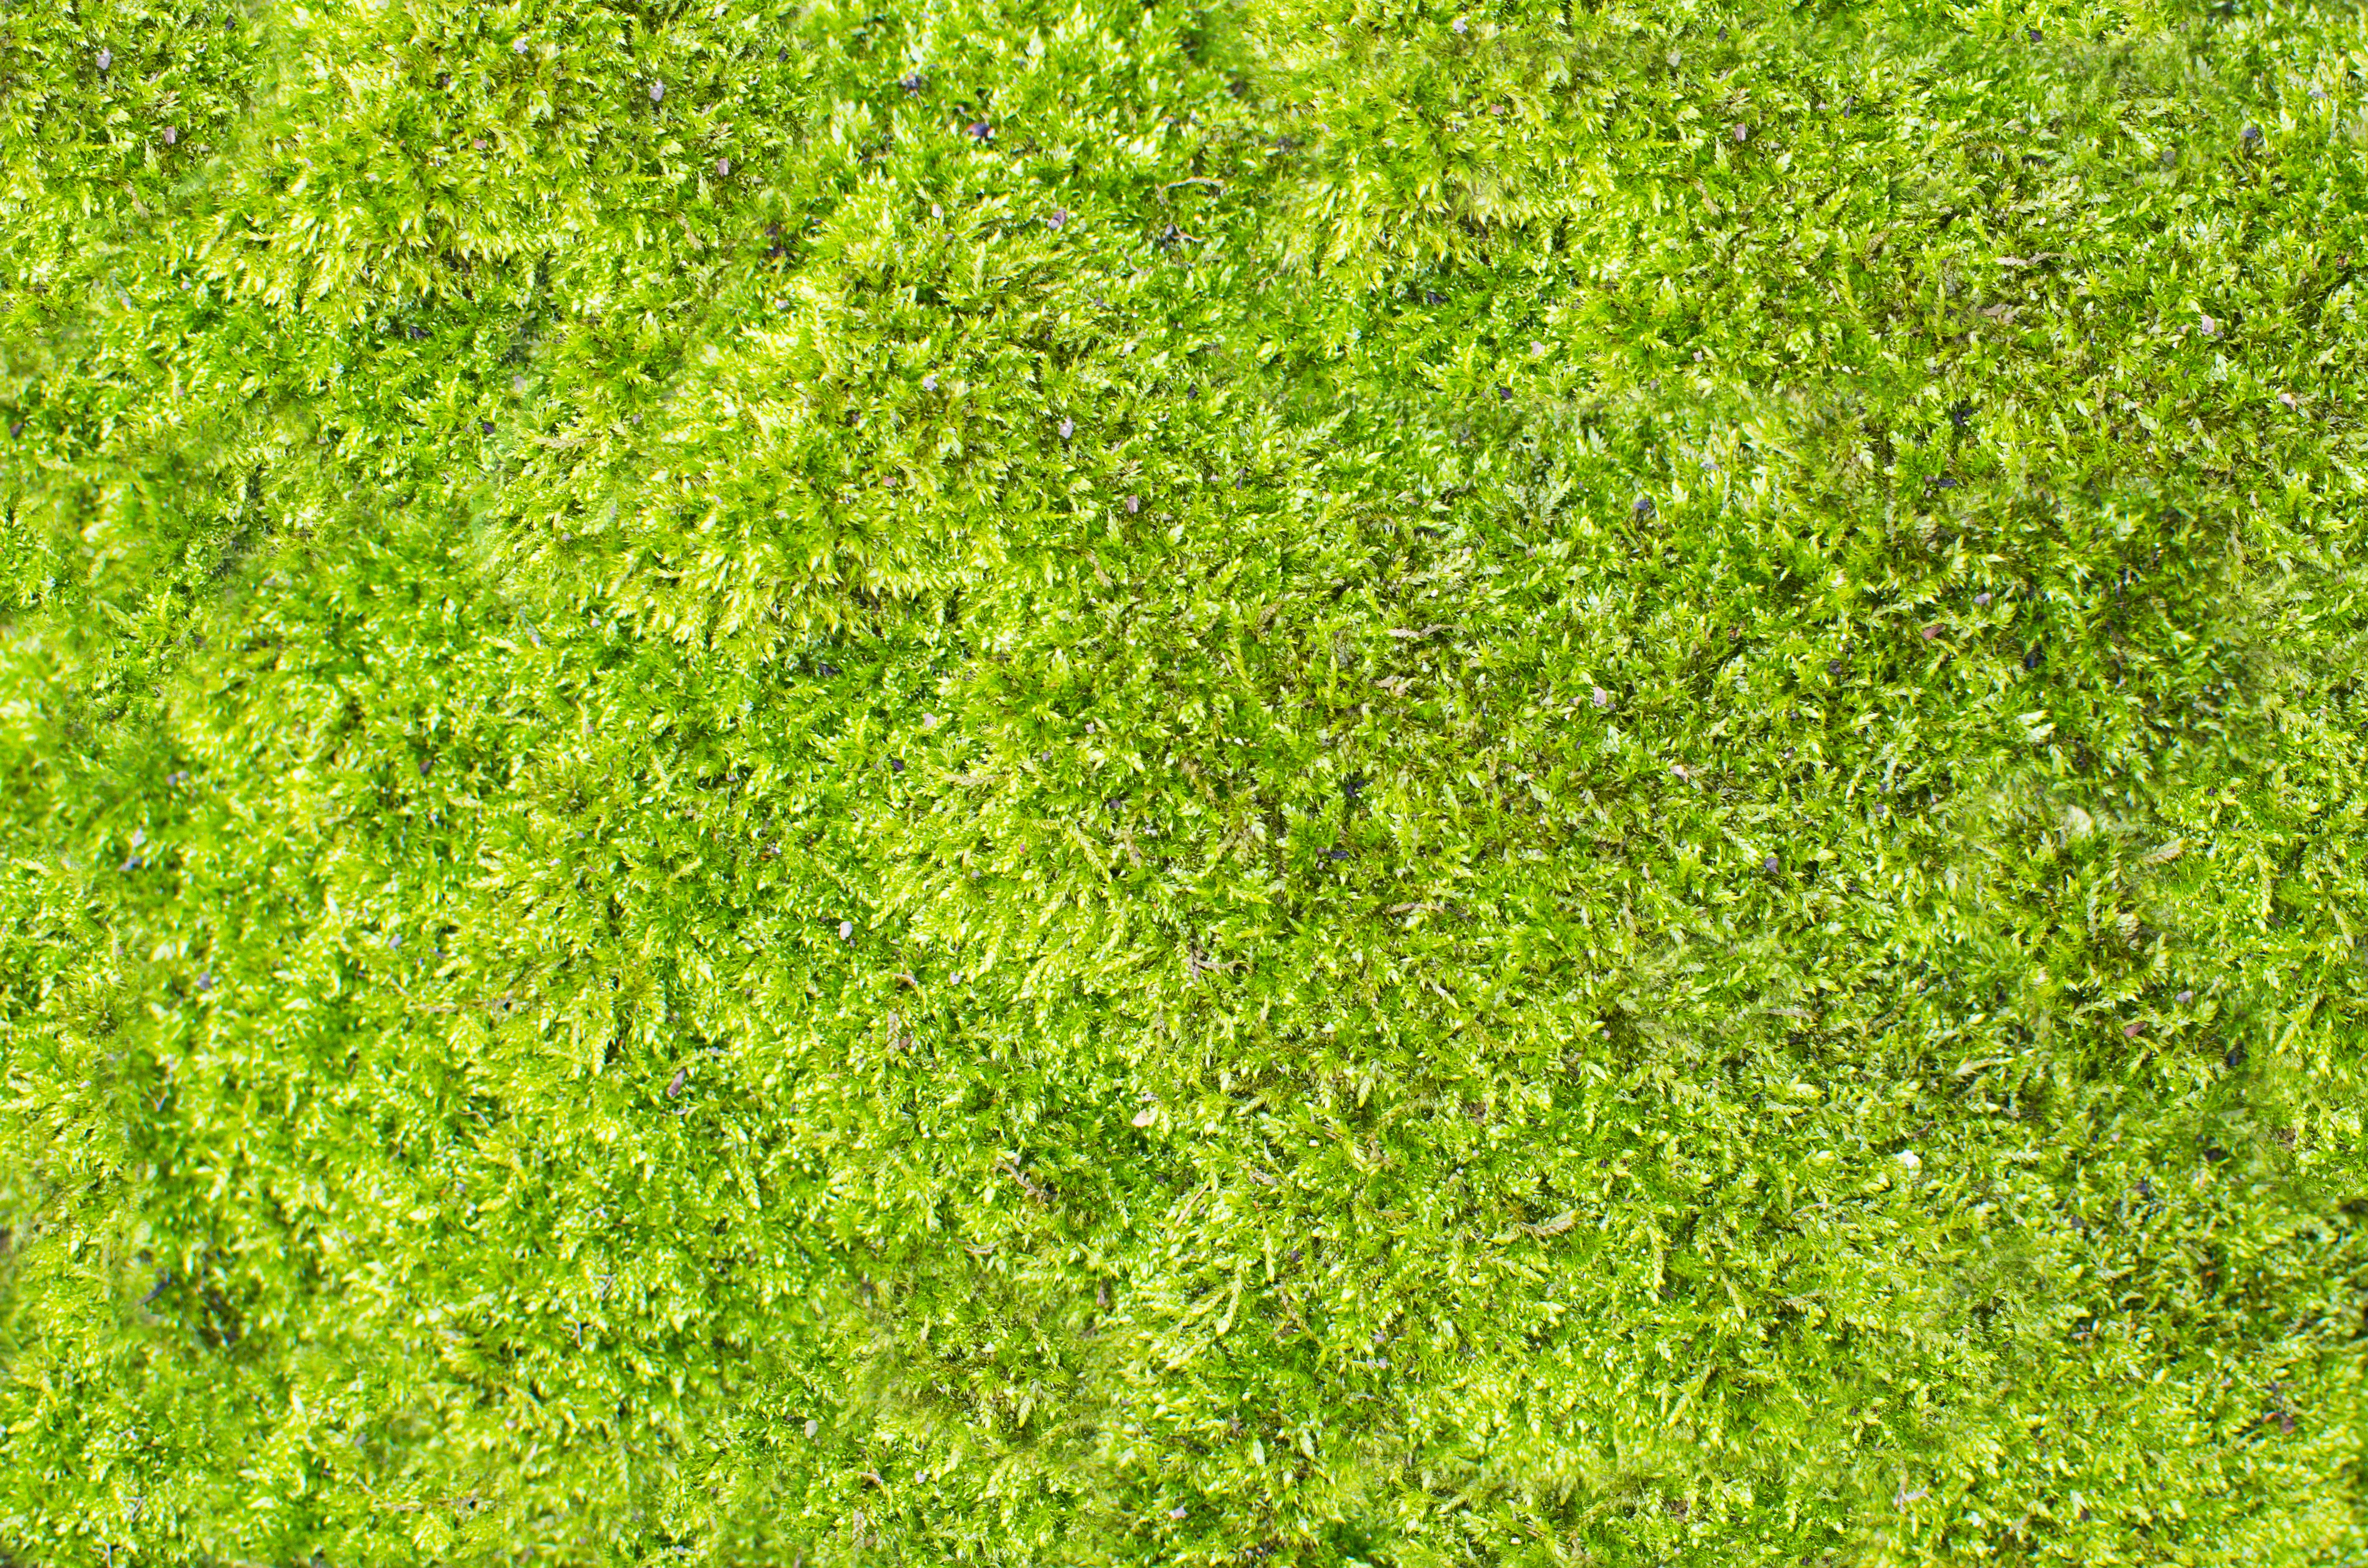 Bright green lawn on top